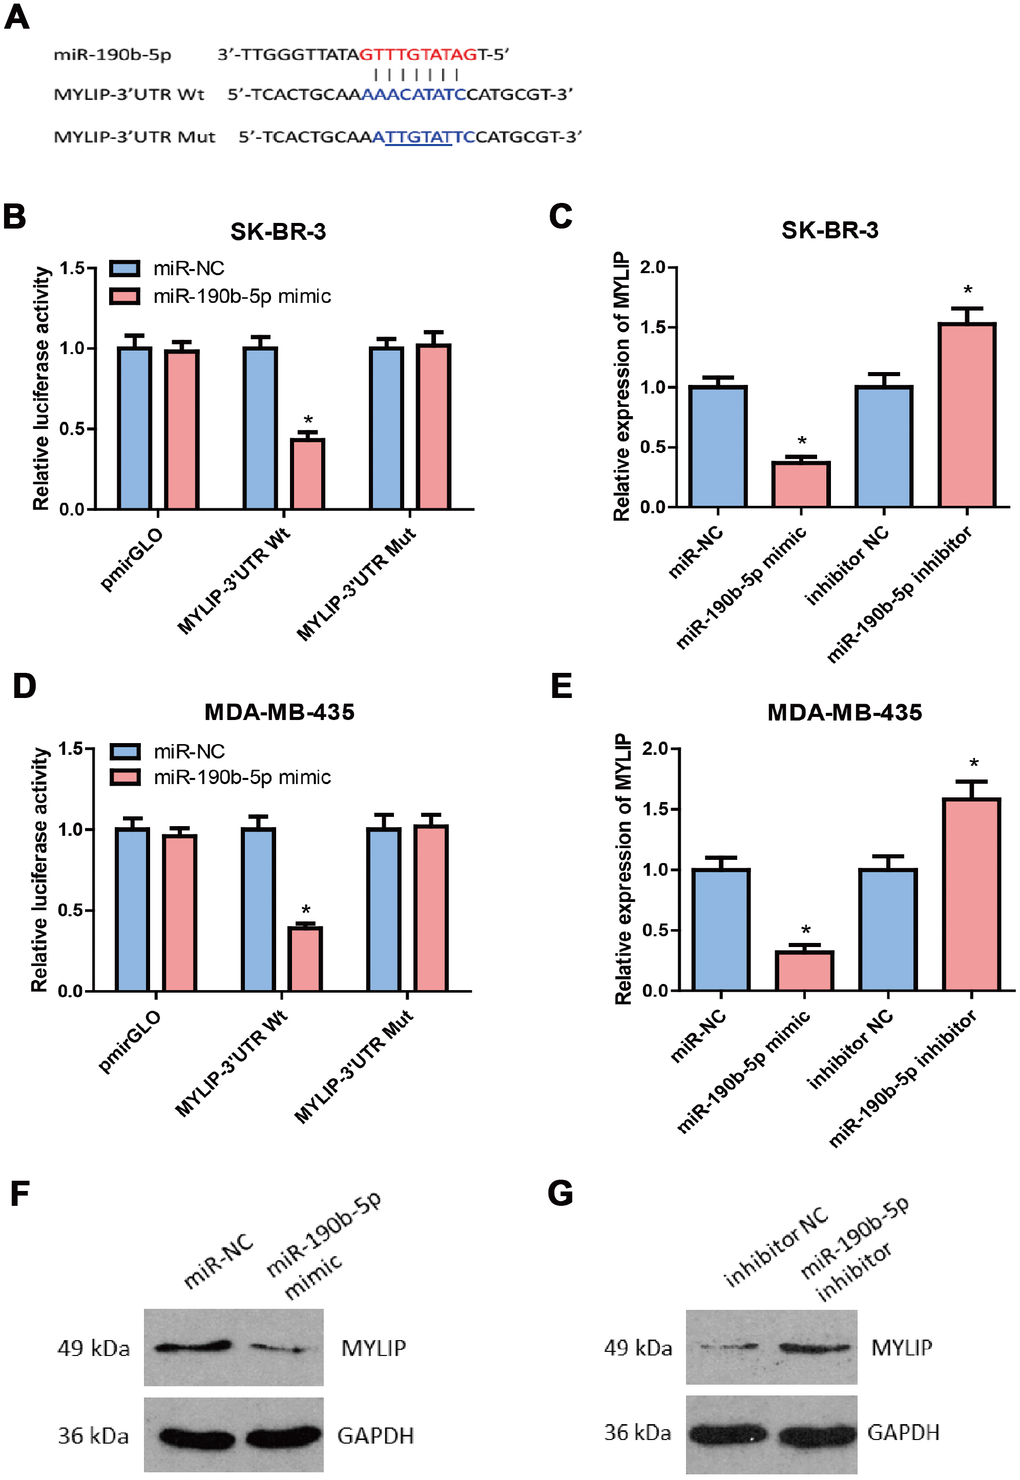 MYLIP is a direct target of miR-190b-5p in breast cancer cells. (A) Complementary sequence between miR-190b-5p and wild type (wt) 3′UTR of MYLIP. The putative binding sites of miR-190b-5p was mutated in 3′UTR of MYLIP (mut MYLIP-3′UTR). (B) SK-BR-3 cells that were co-transfected with miR-190b-5p mimics and wt or mut 3′UTR of MYLIP were subjected to luciferase activity measurement. (C) SK-BR-3 cells that were transfected with miR-190b-5p mimics or miR-190b-5p inhibitors were subjected to qRT-PCR for MYLIP mRNA expression. (D) MDA-MB-435 cells that were co-transfected with miR-190b-5p mimics and wt or mut 3′UTR of MYLIP were subjected to luciferase activity measurement. (E) MDA-MB-435 cells that were transfected with miR-190b-5p mimics or miR-190b-5p inhibitors were subjected to qRT-PCR for MYLIP mRNA expression. (F) miR-190b-5p overexpression reduced the protein expression level of MYLIP in MDA-MB-435 cells. (G) miR-190b-5p inhibition increased the protein expression level of MYLIP in SK-BR-3 cells. The asterisk (*) indicates a significant difference (p 